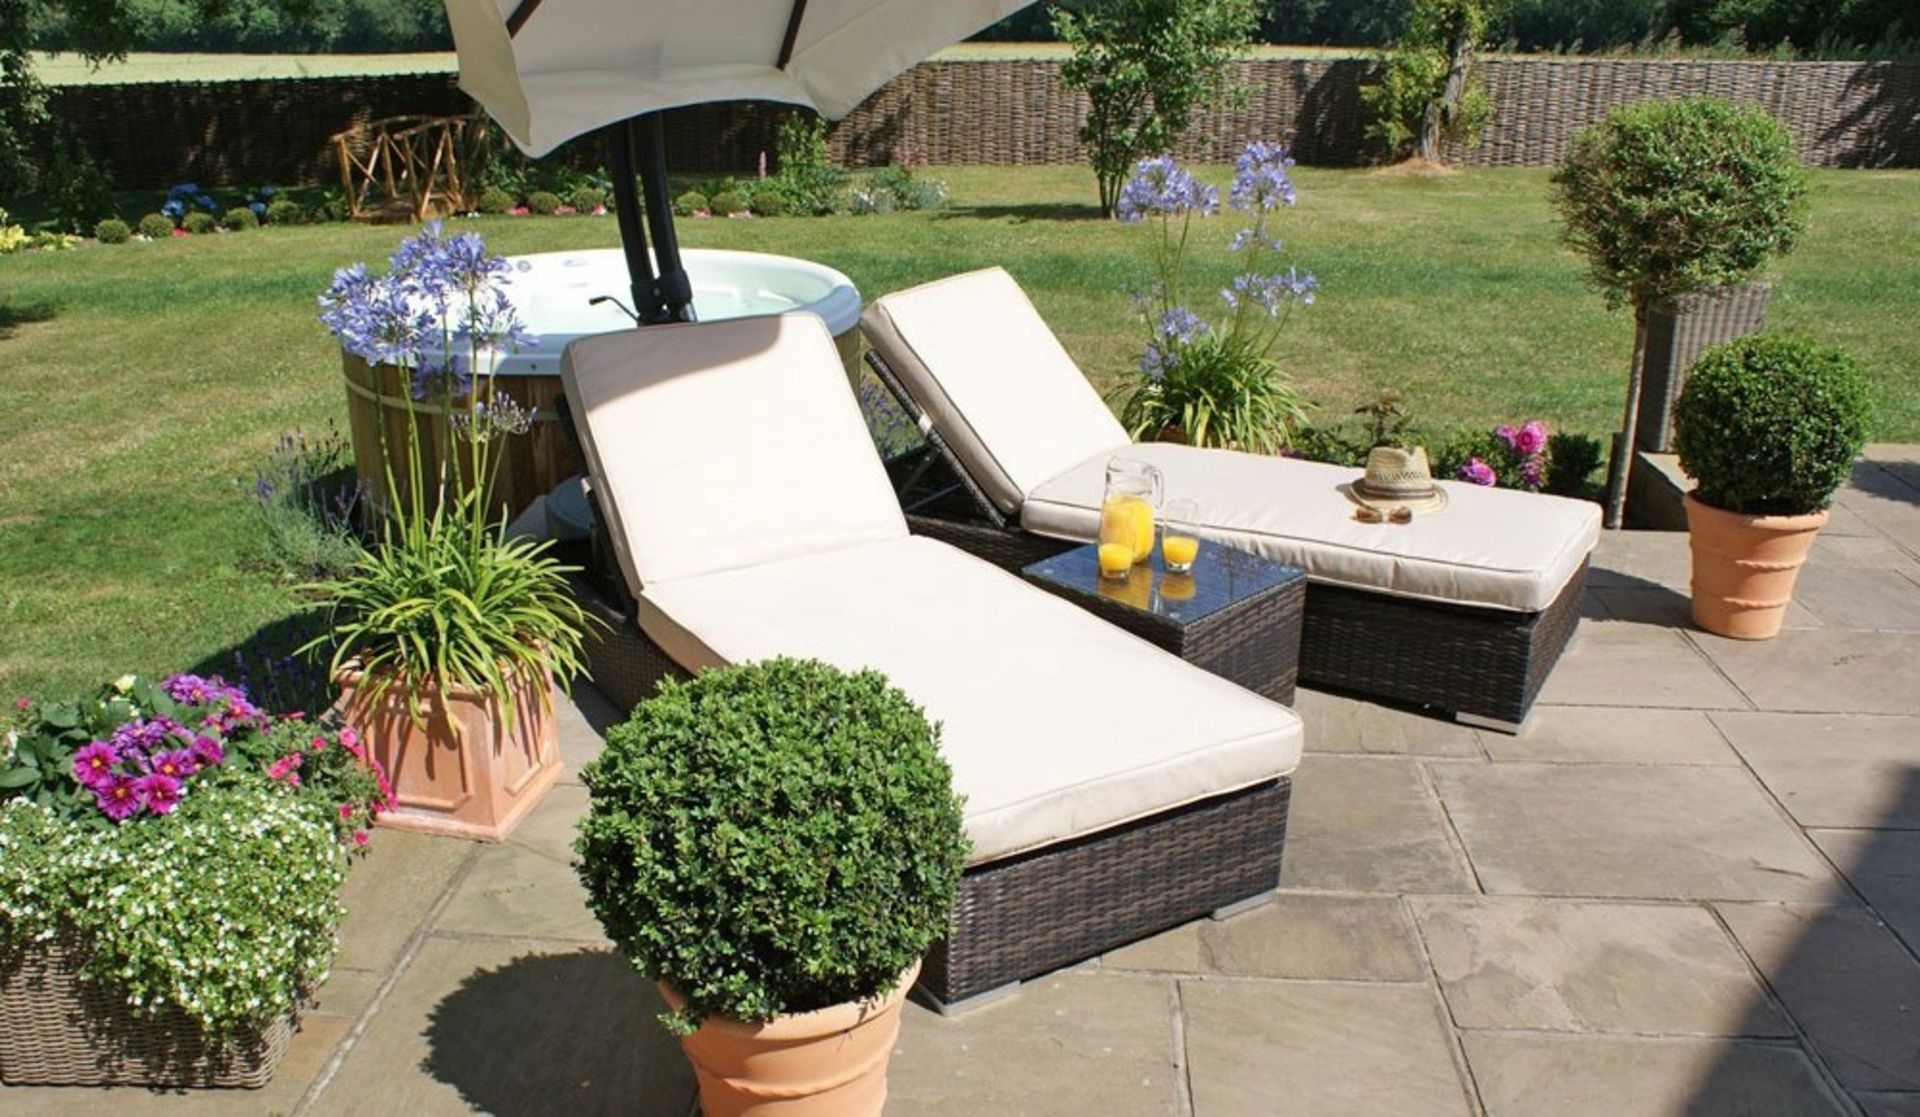 + VAT Brand New Chelsea Garden Company Sunloungers And Table Set - Includes 2 Sunloungers -